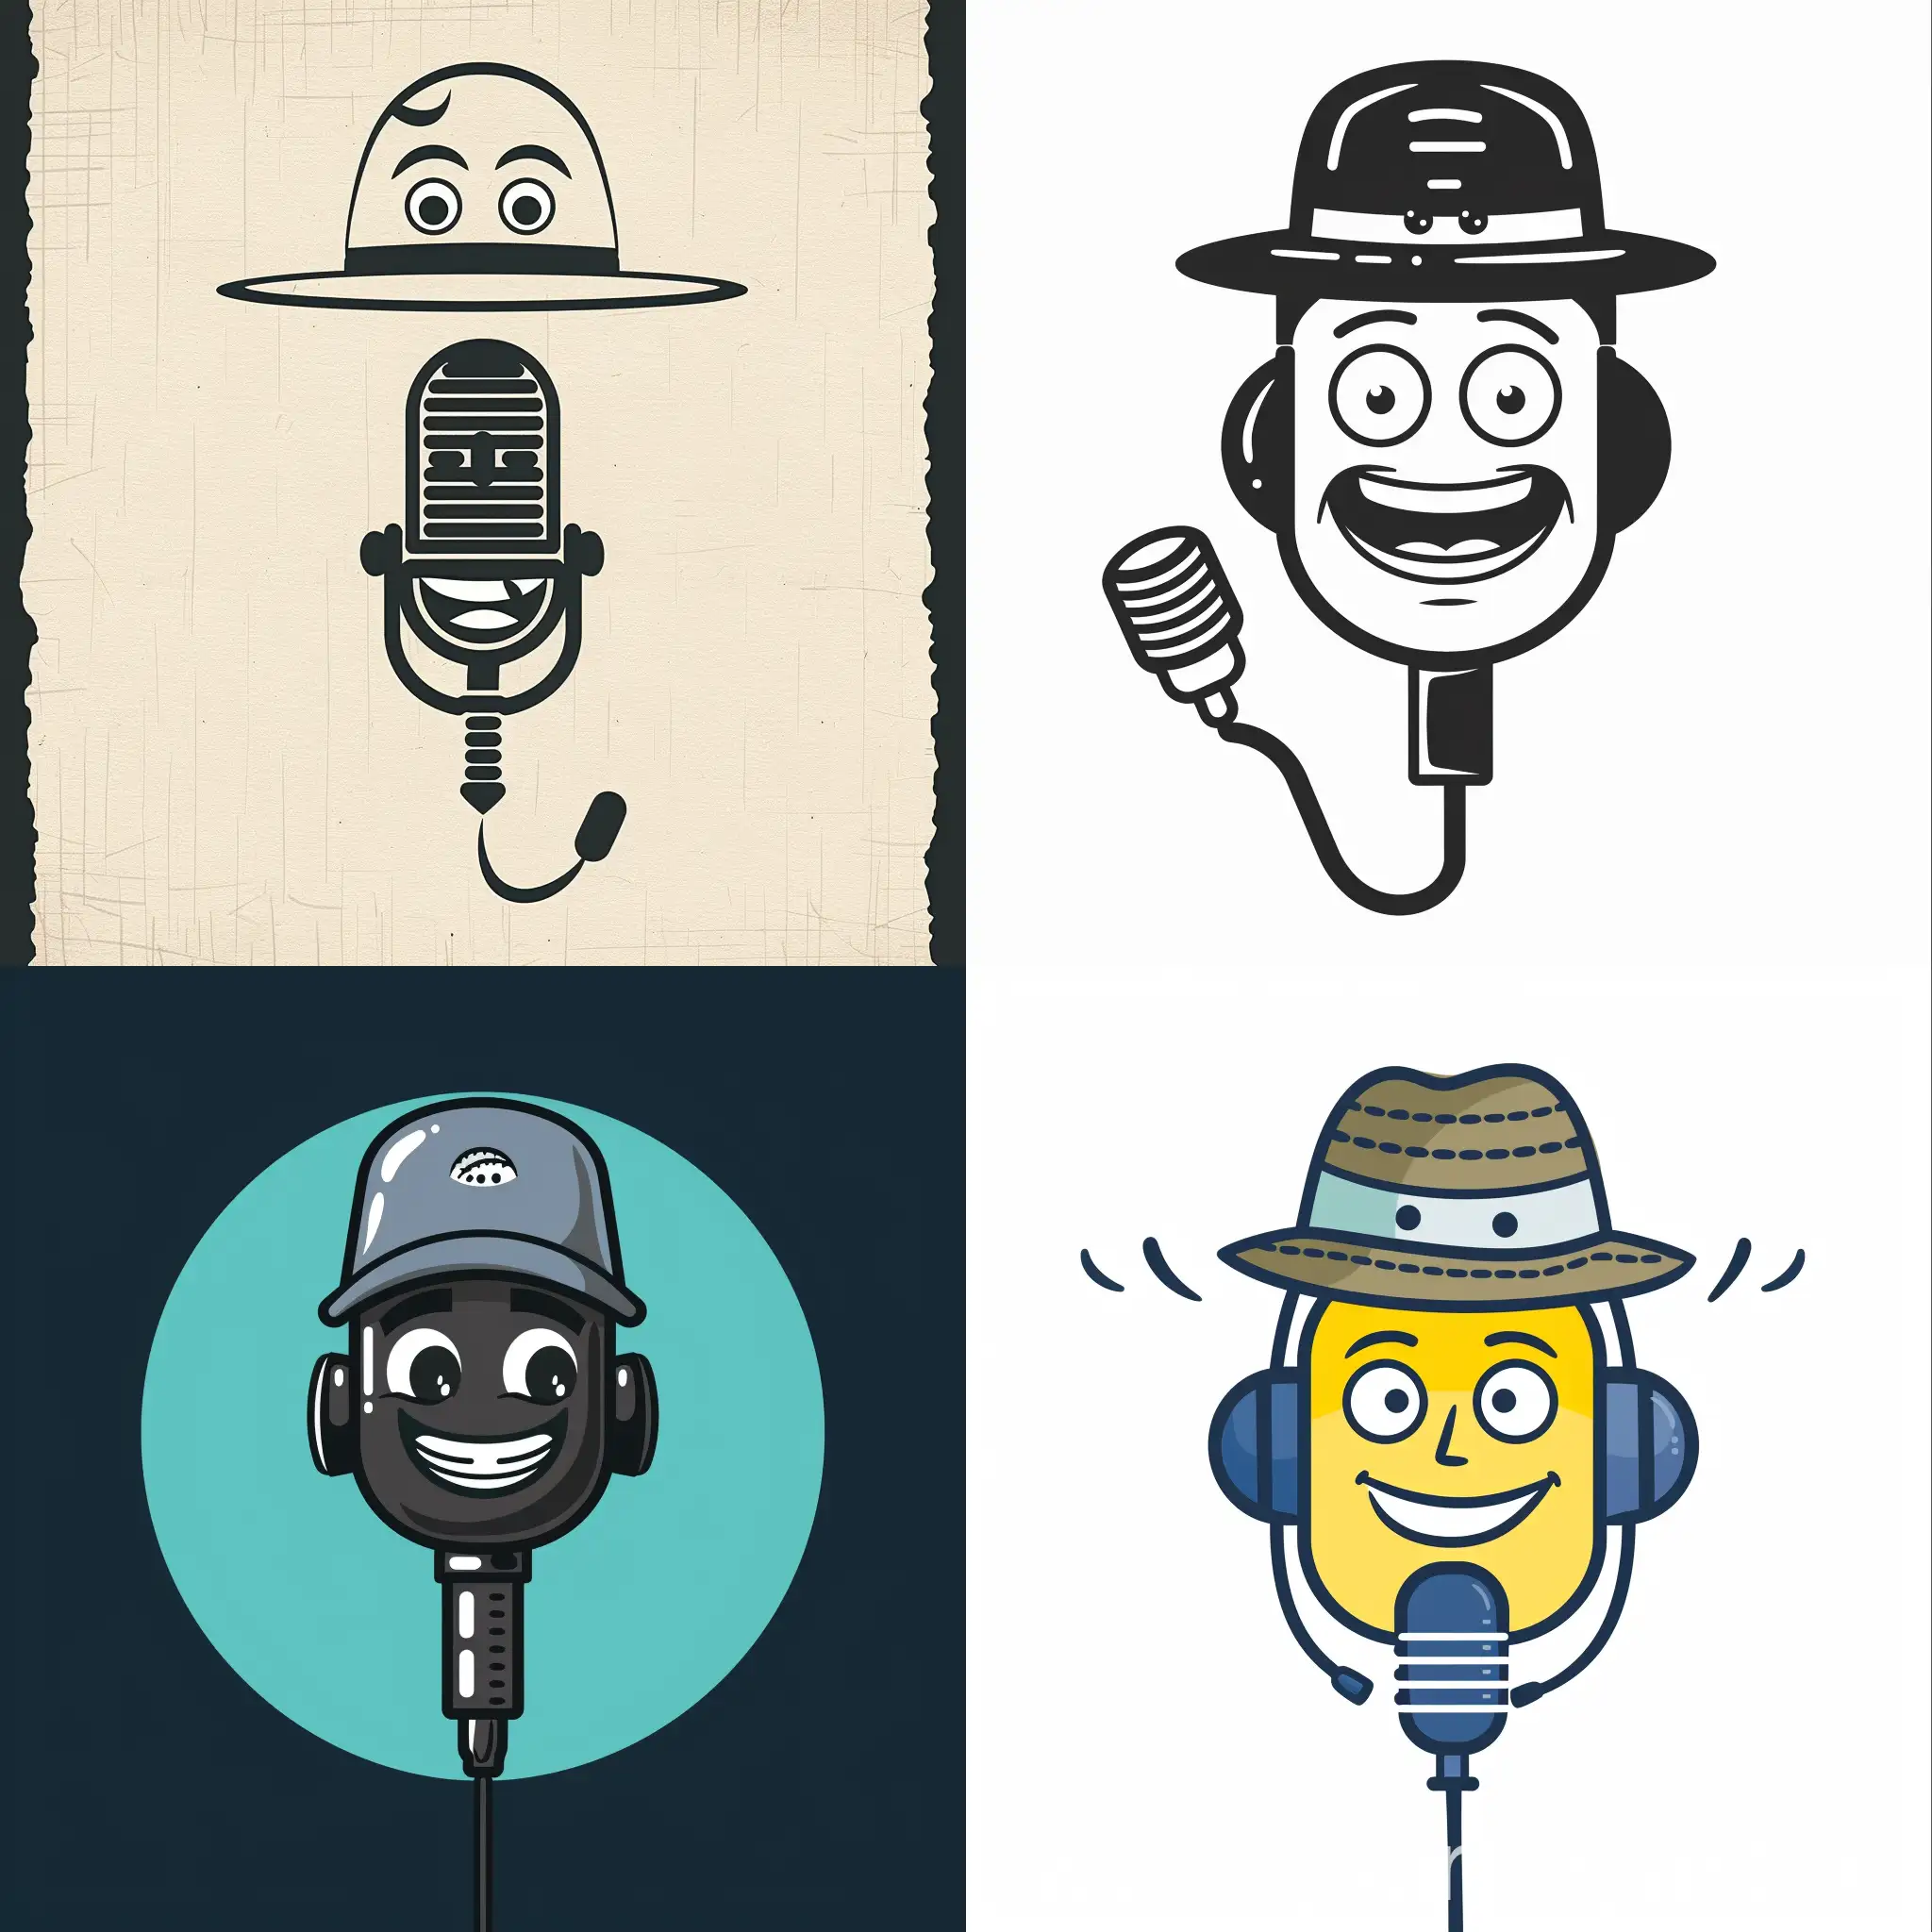 Podcast logo with mic and the hat above the mic smile and eyes